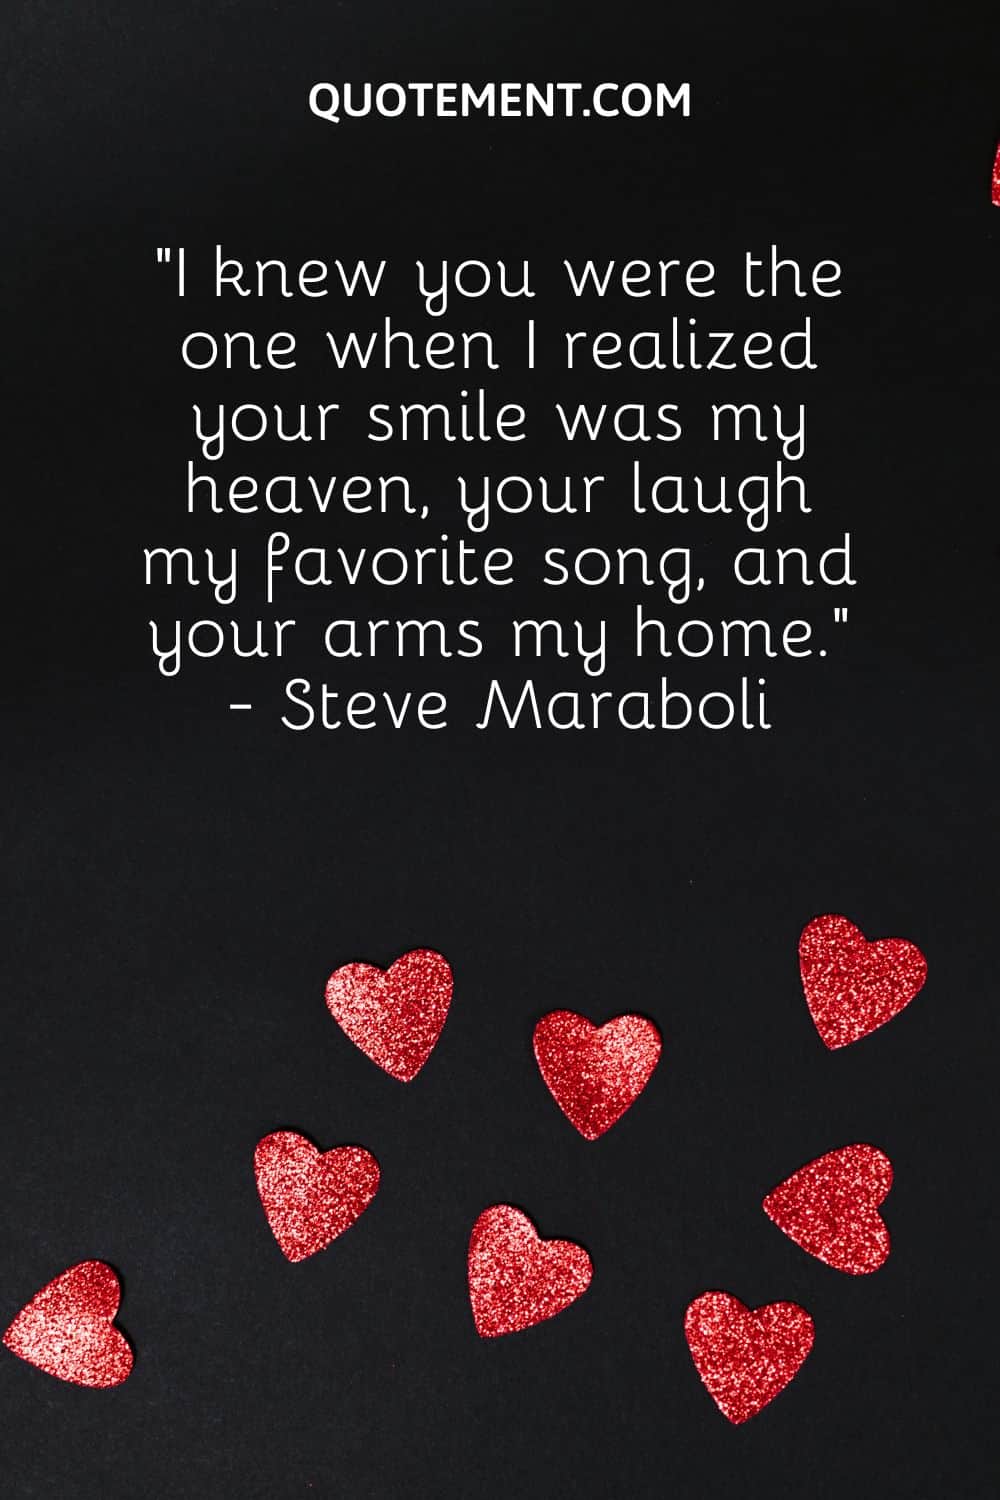 “I knew you were the one when I realized your smile was my heaven, your laugh my favorite song, and your arms my home.” - Steve Maraboli